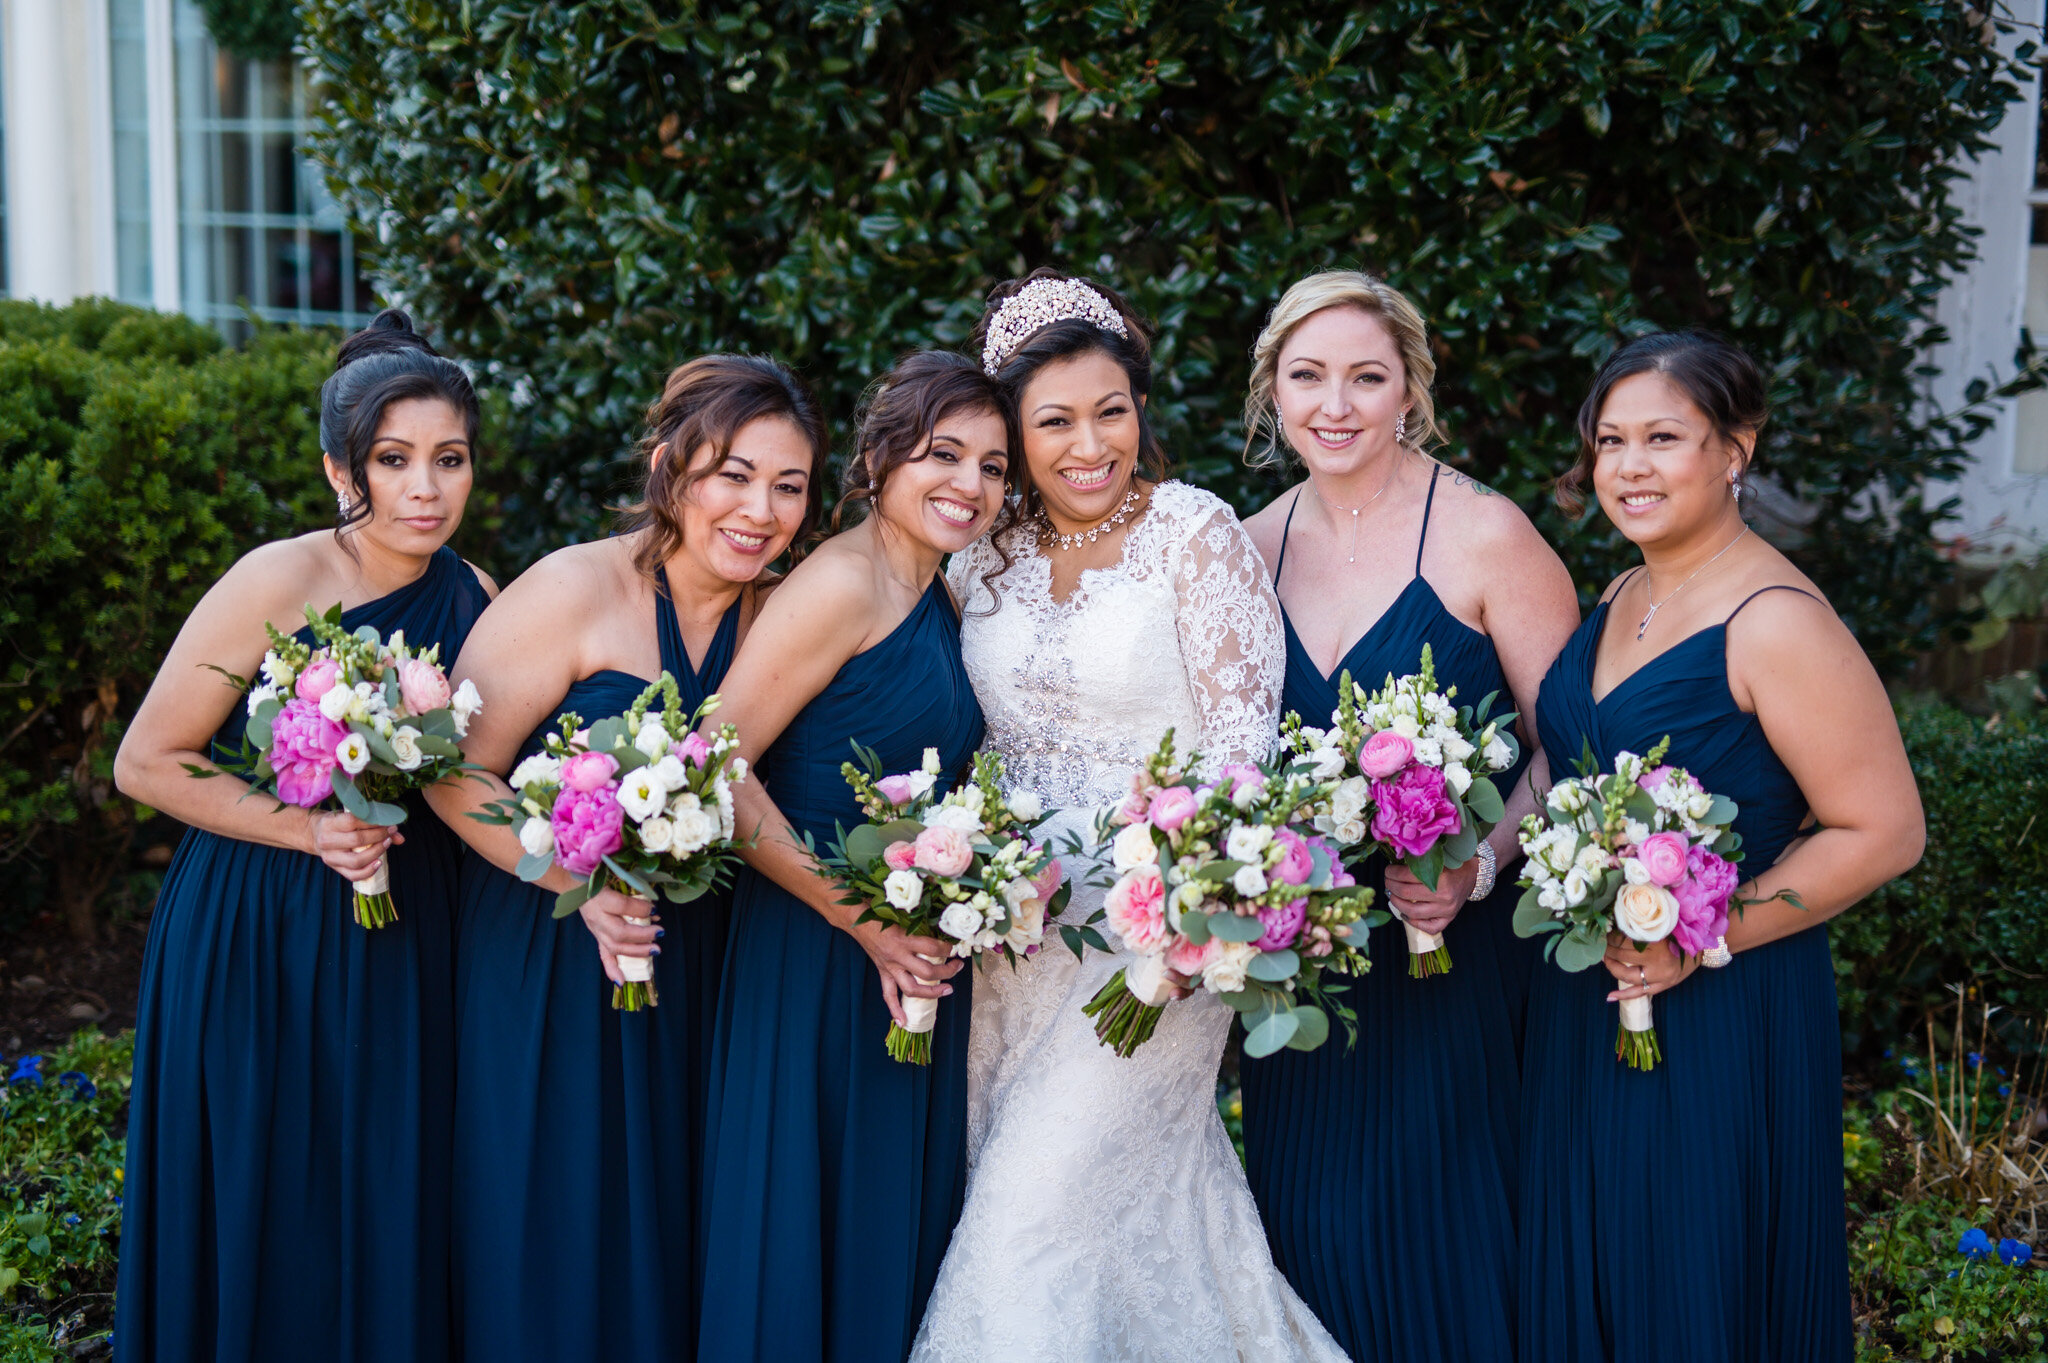 Bride with her bridesmaids at her wedding in Northern Virginia.